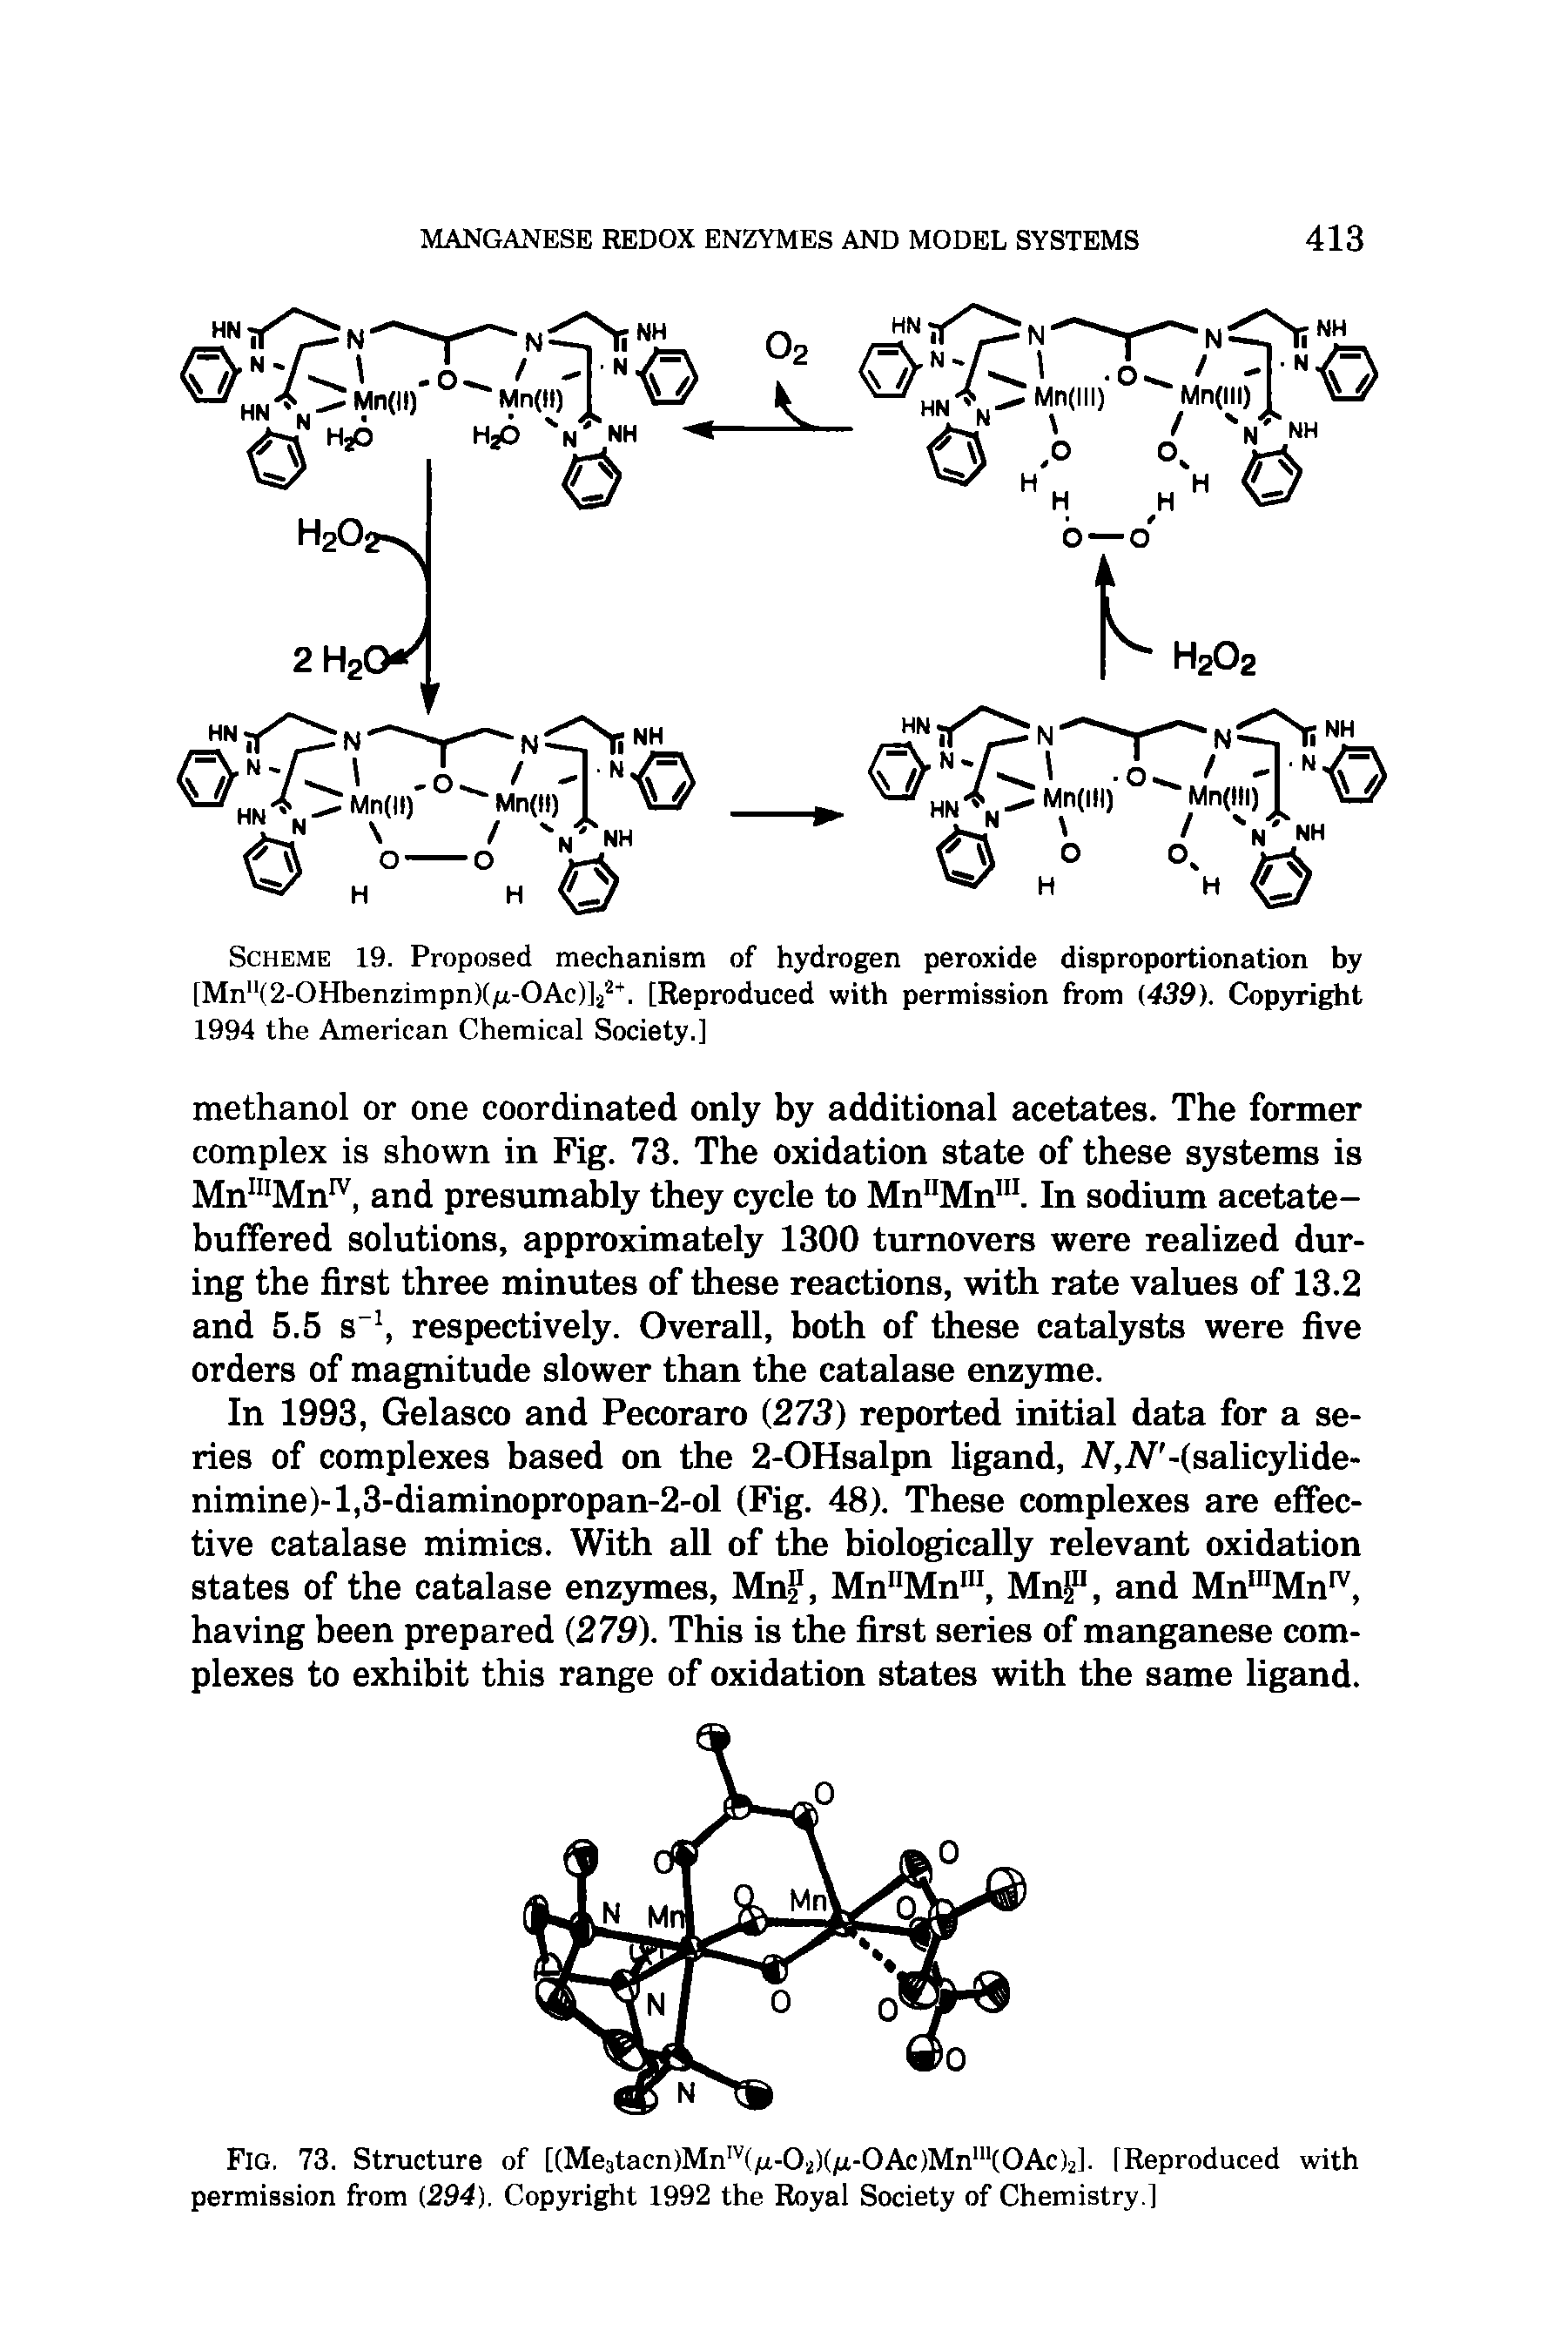 Scheme 19. Proposed mechanism of hydrogen peroxide disproportionation by Mn"(2-OHbenzimpn)(/n-OAc) 22 . [Reproduced with permission from (439). Copyright 1994 the American Chemical Society.]...